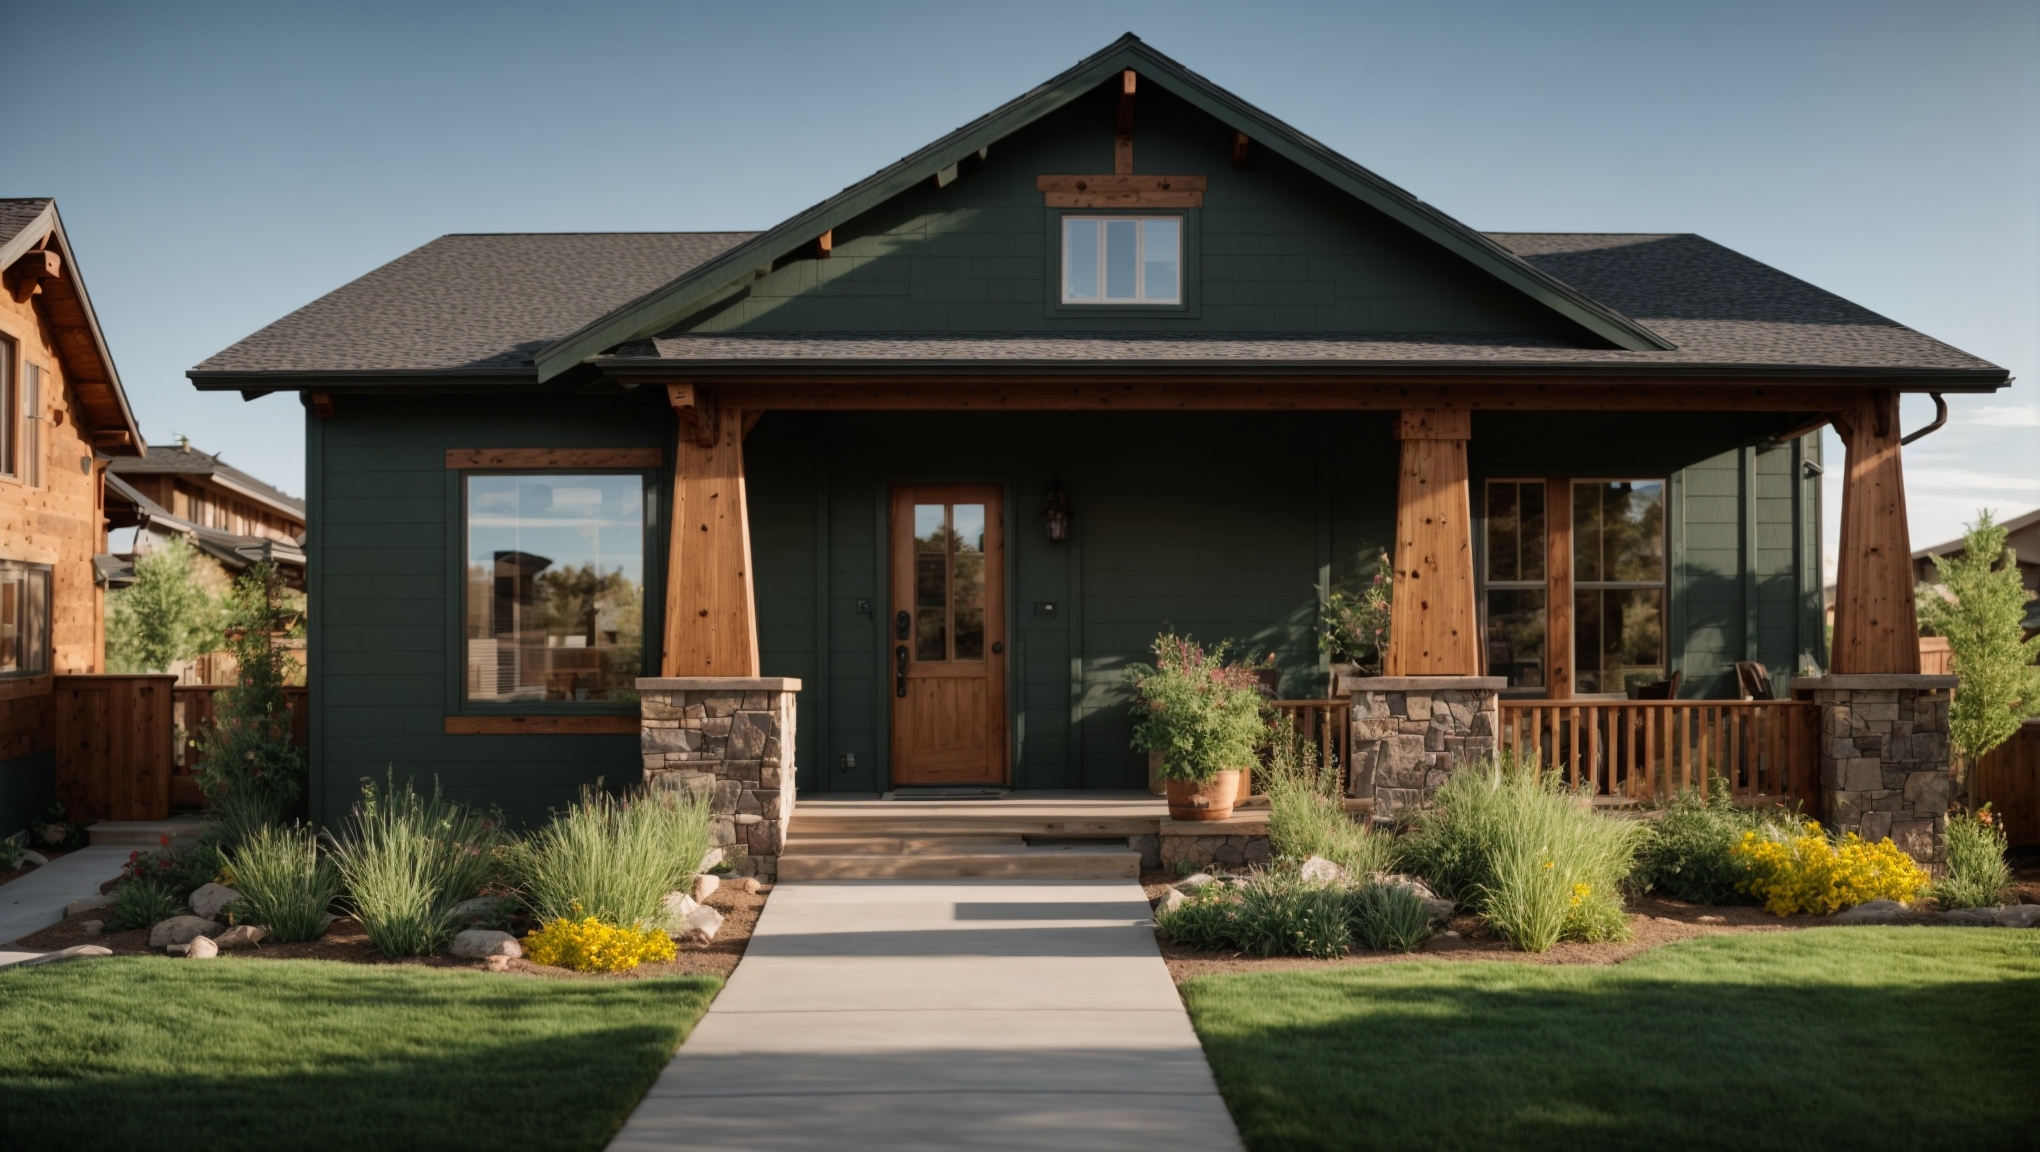 The expertise of stucco siding in Boulder is Colorado’s commercial marvel.